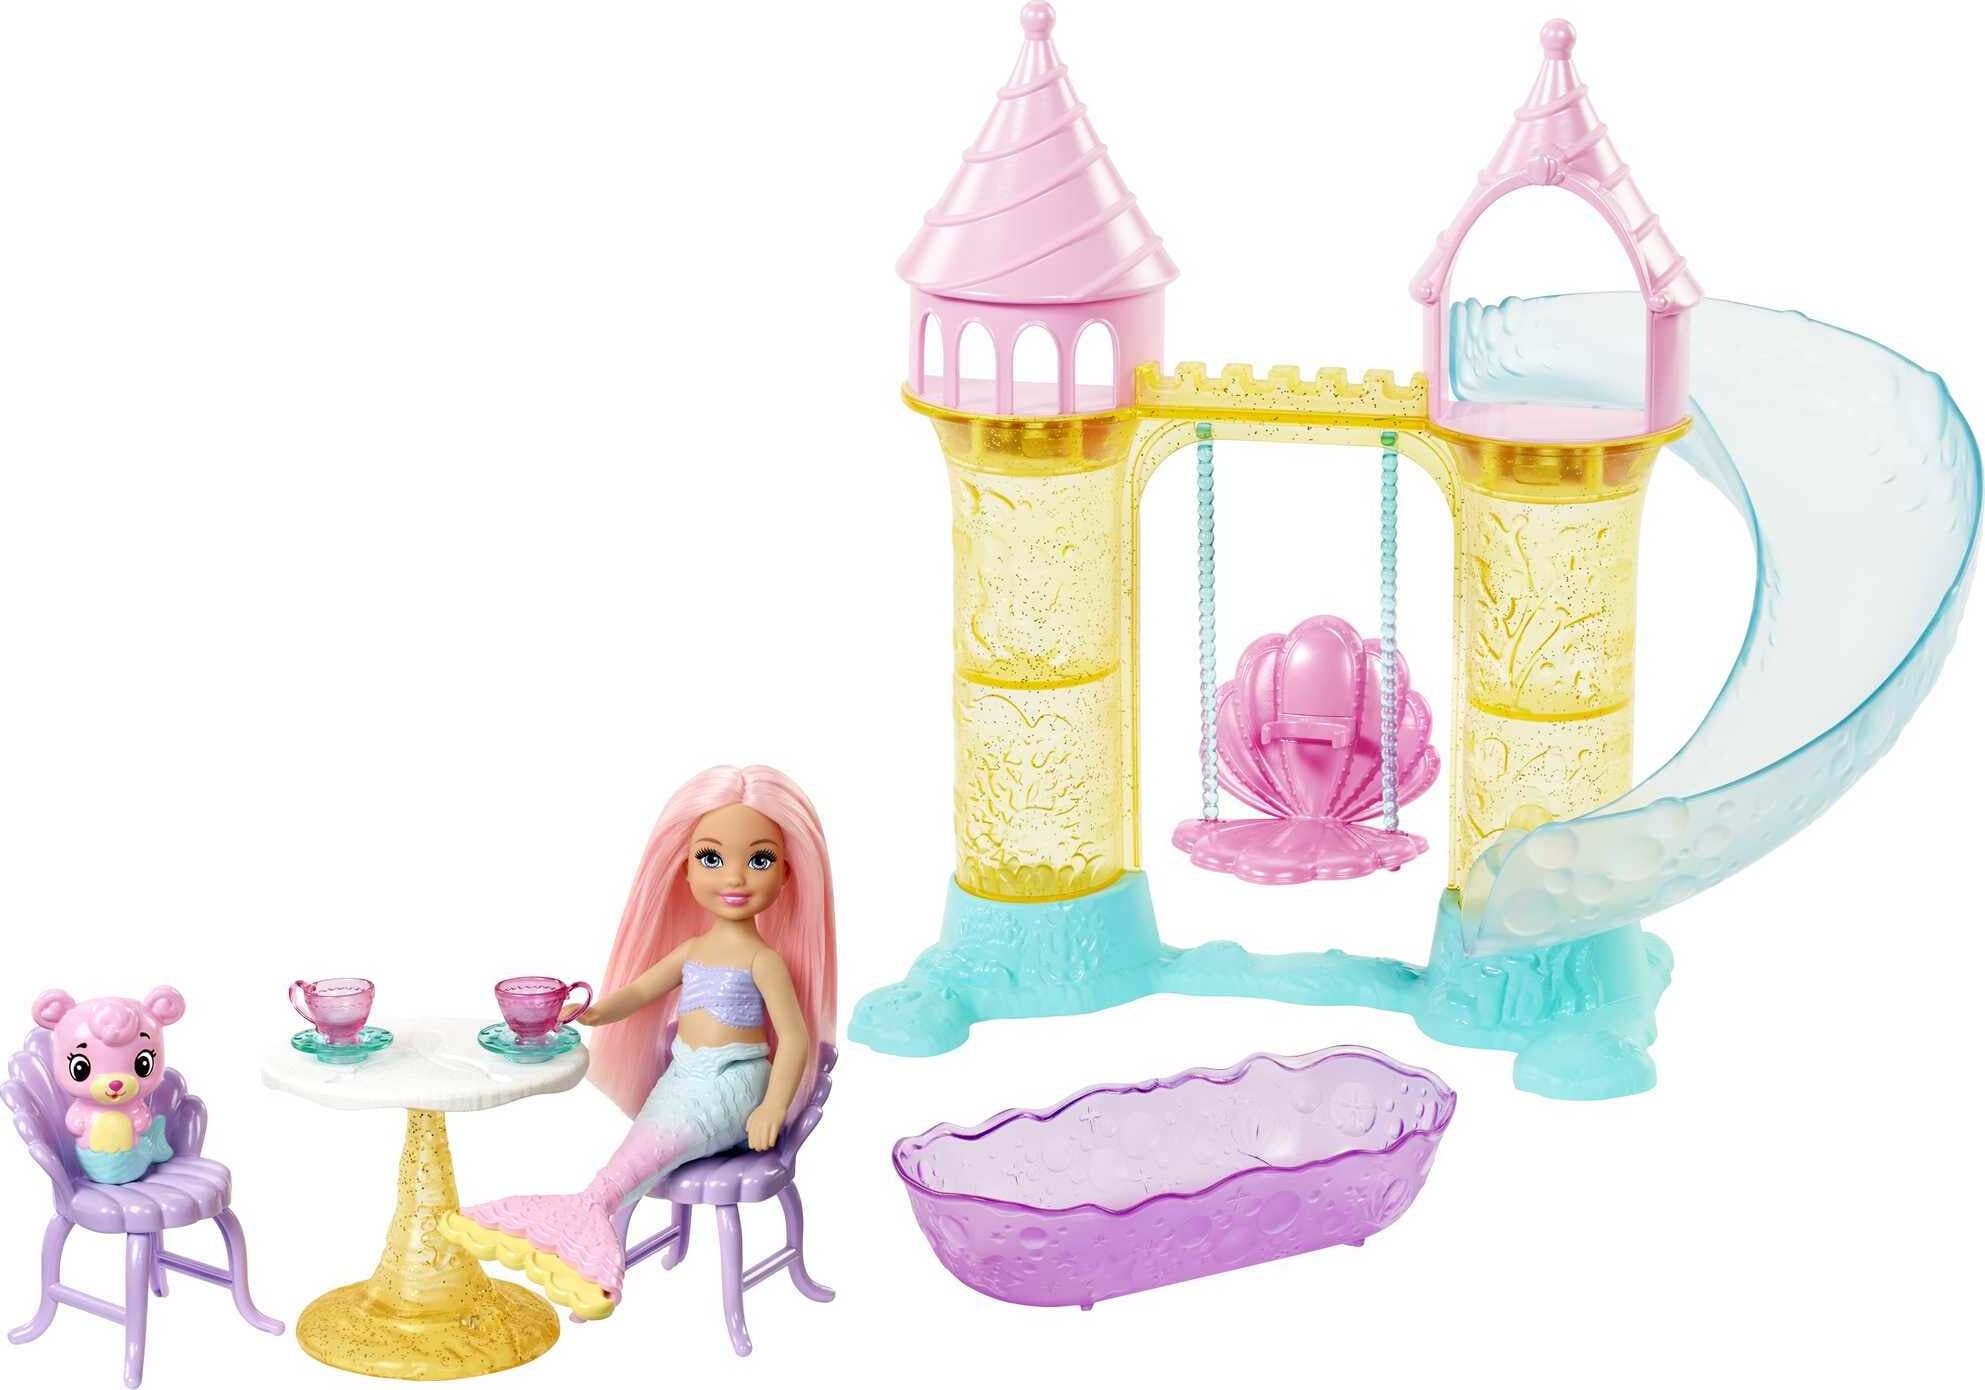 Barbie Club Chelsea Treehouse Dollhouse Playset with Accessories -  Walmart.com